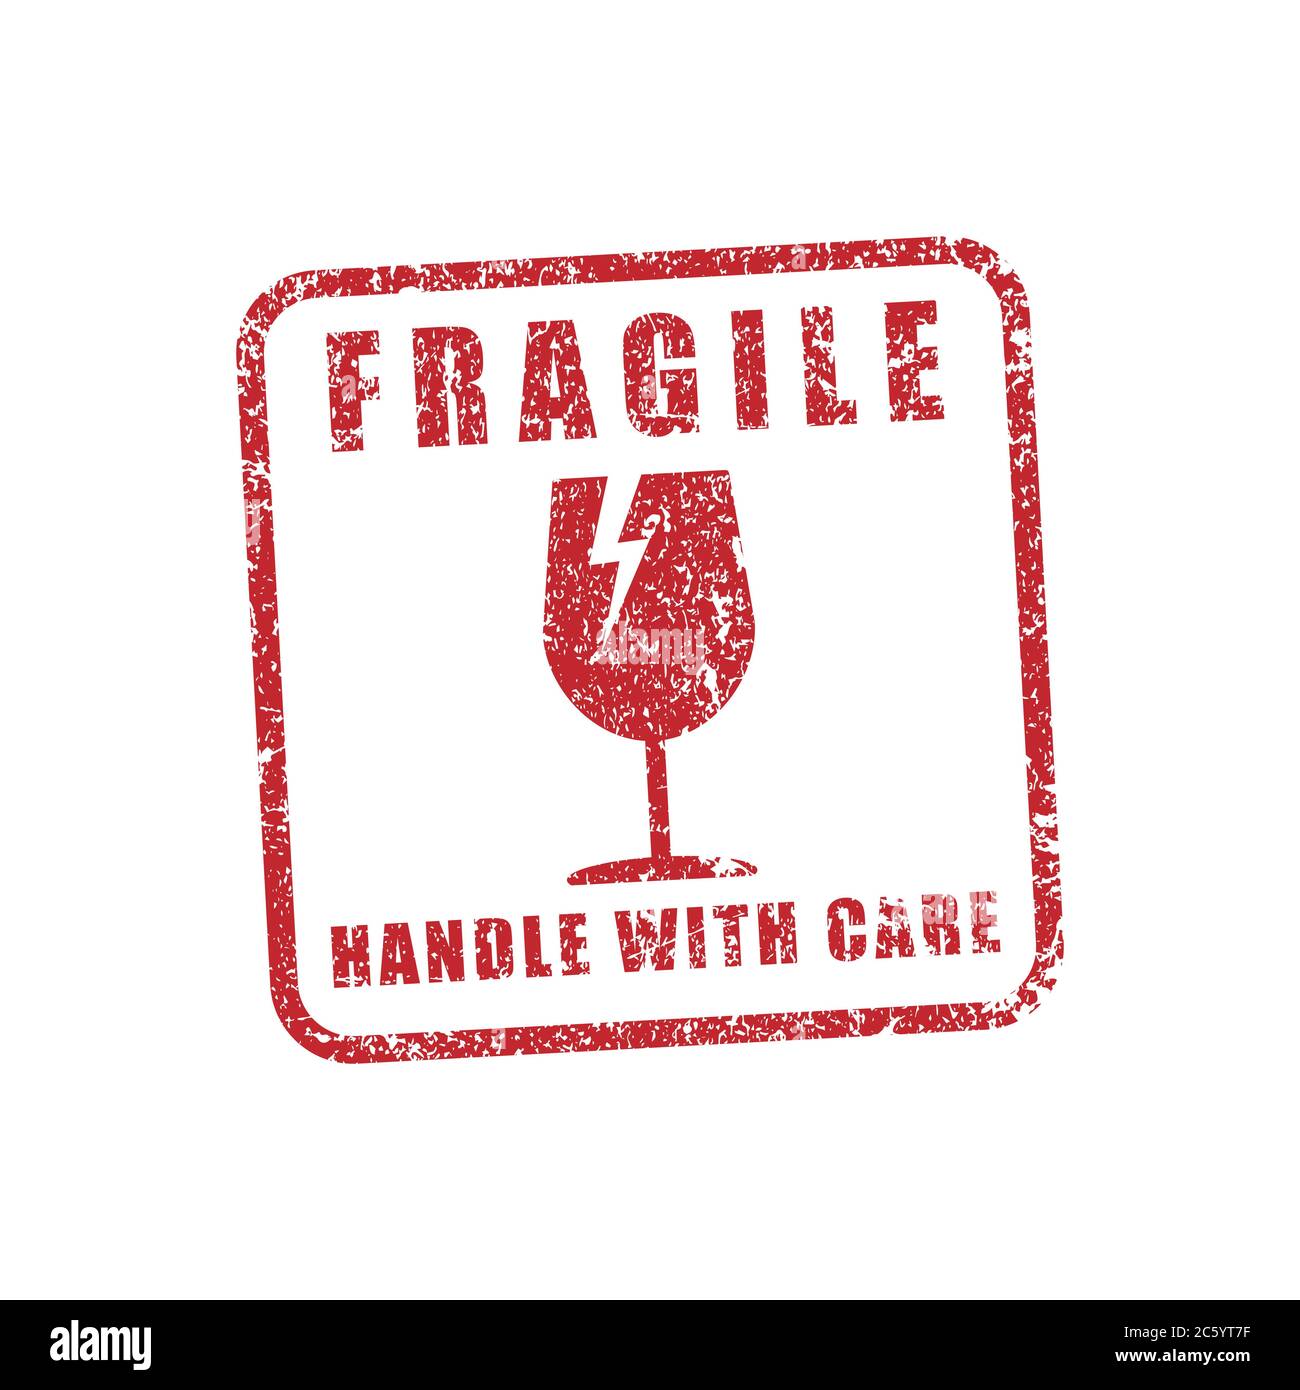 Fragile sticker icon symbol. Handle with care logo sign. Keep dry, This way up. Vector illustration image. Isolated on white background. Stock Vector